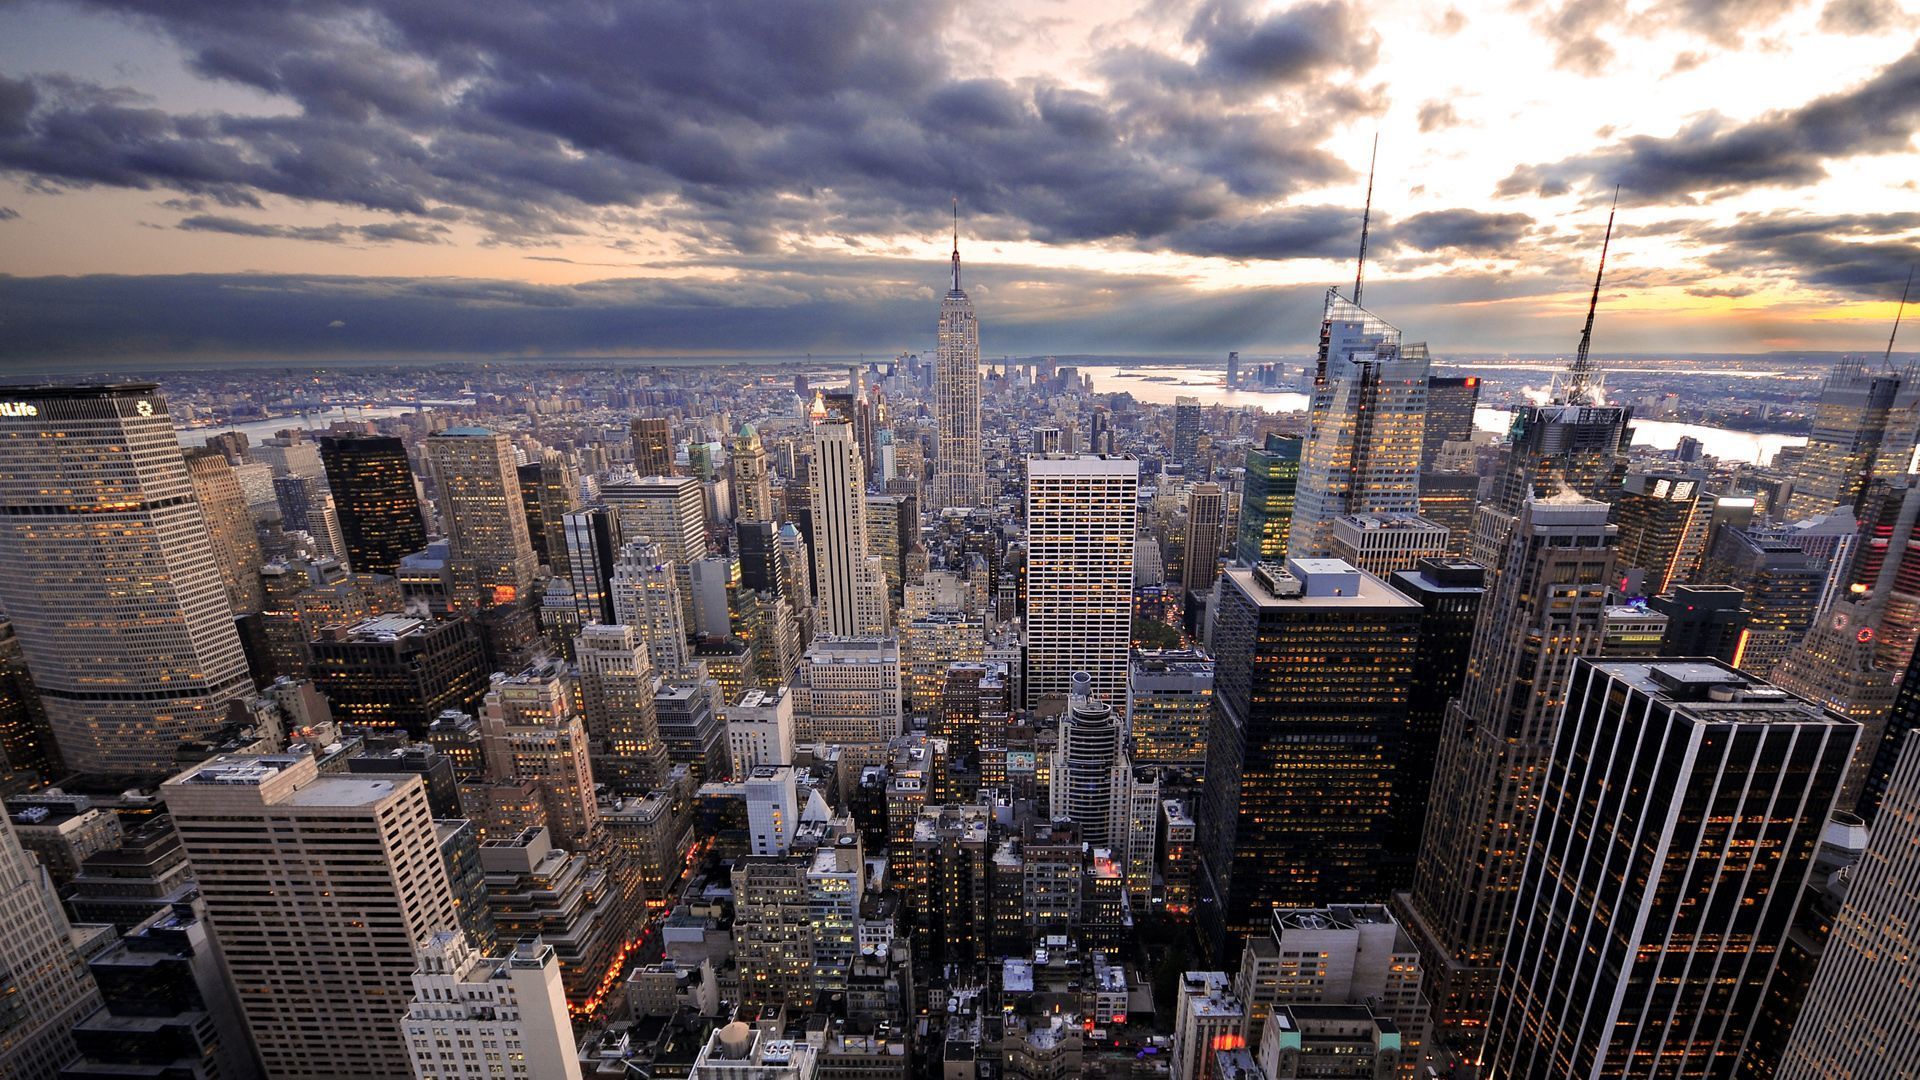 New York City HD Wallpaper - New York City Images, New Wallpapers